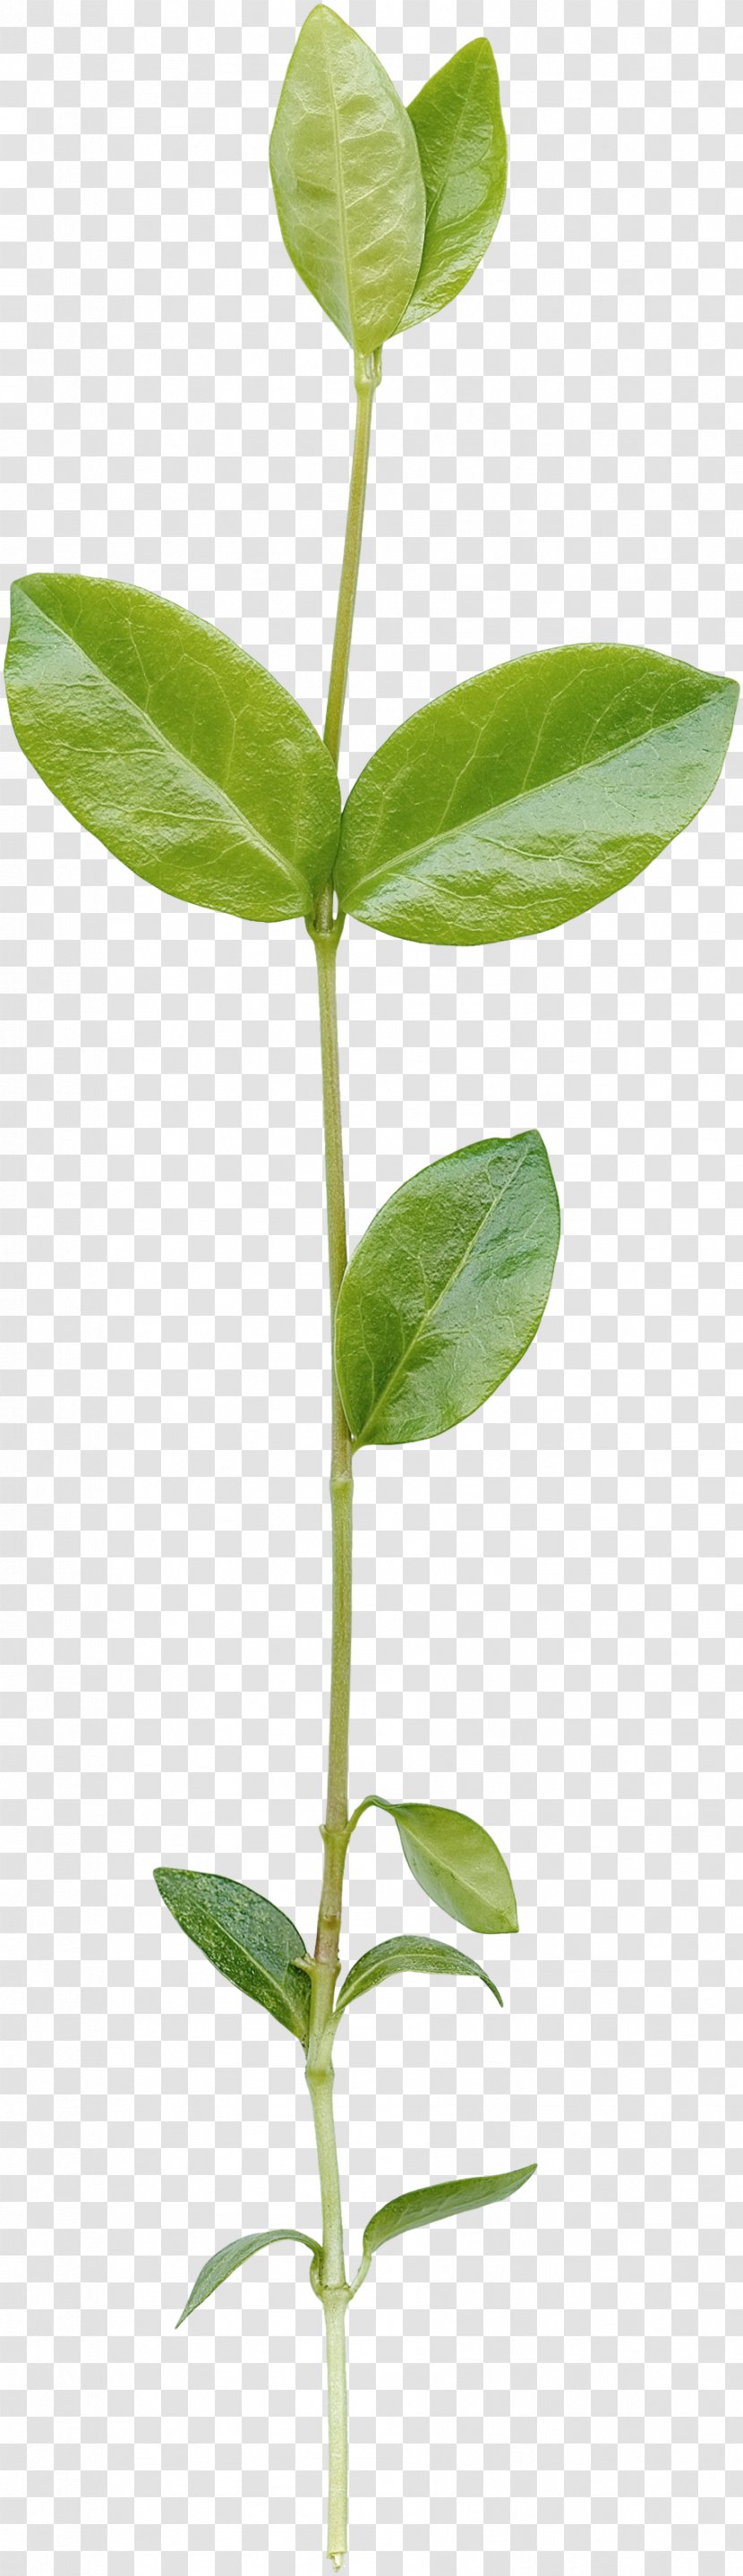 Download - Computer Graphics - Green Leaves Transparent PNG